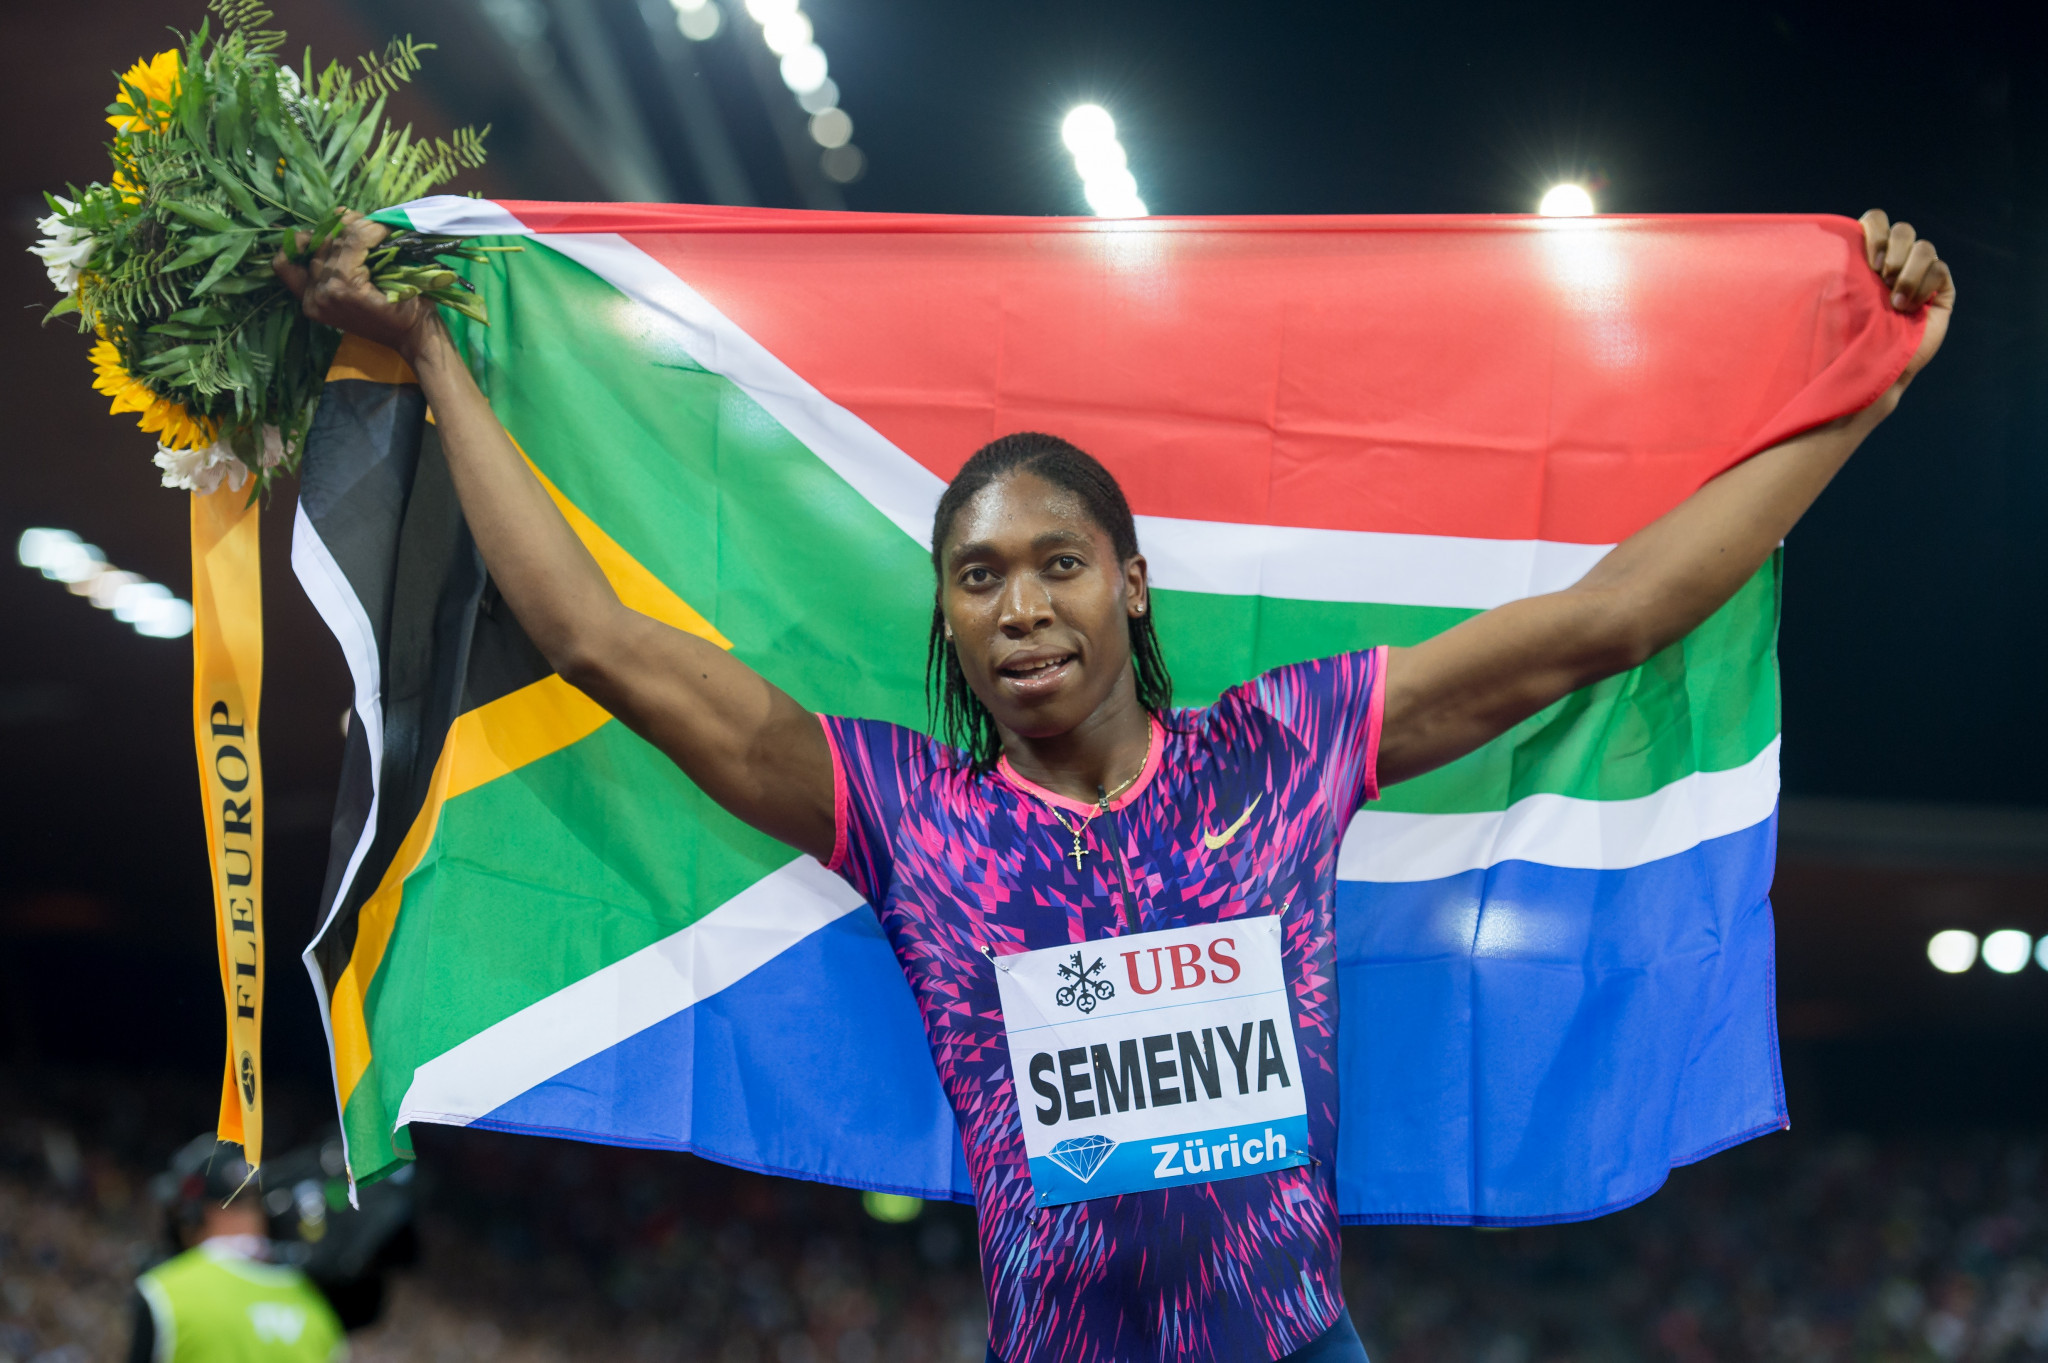 Two-time Olympic gold medallist Semenya headlines South Africa's team for Gold Coast 2018